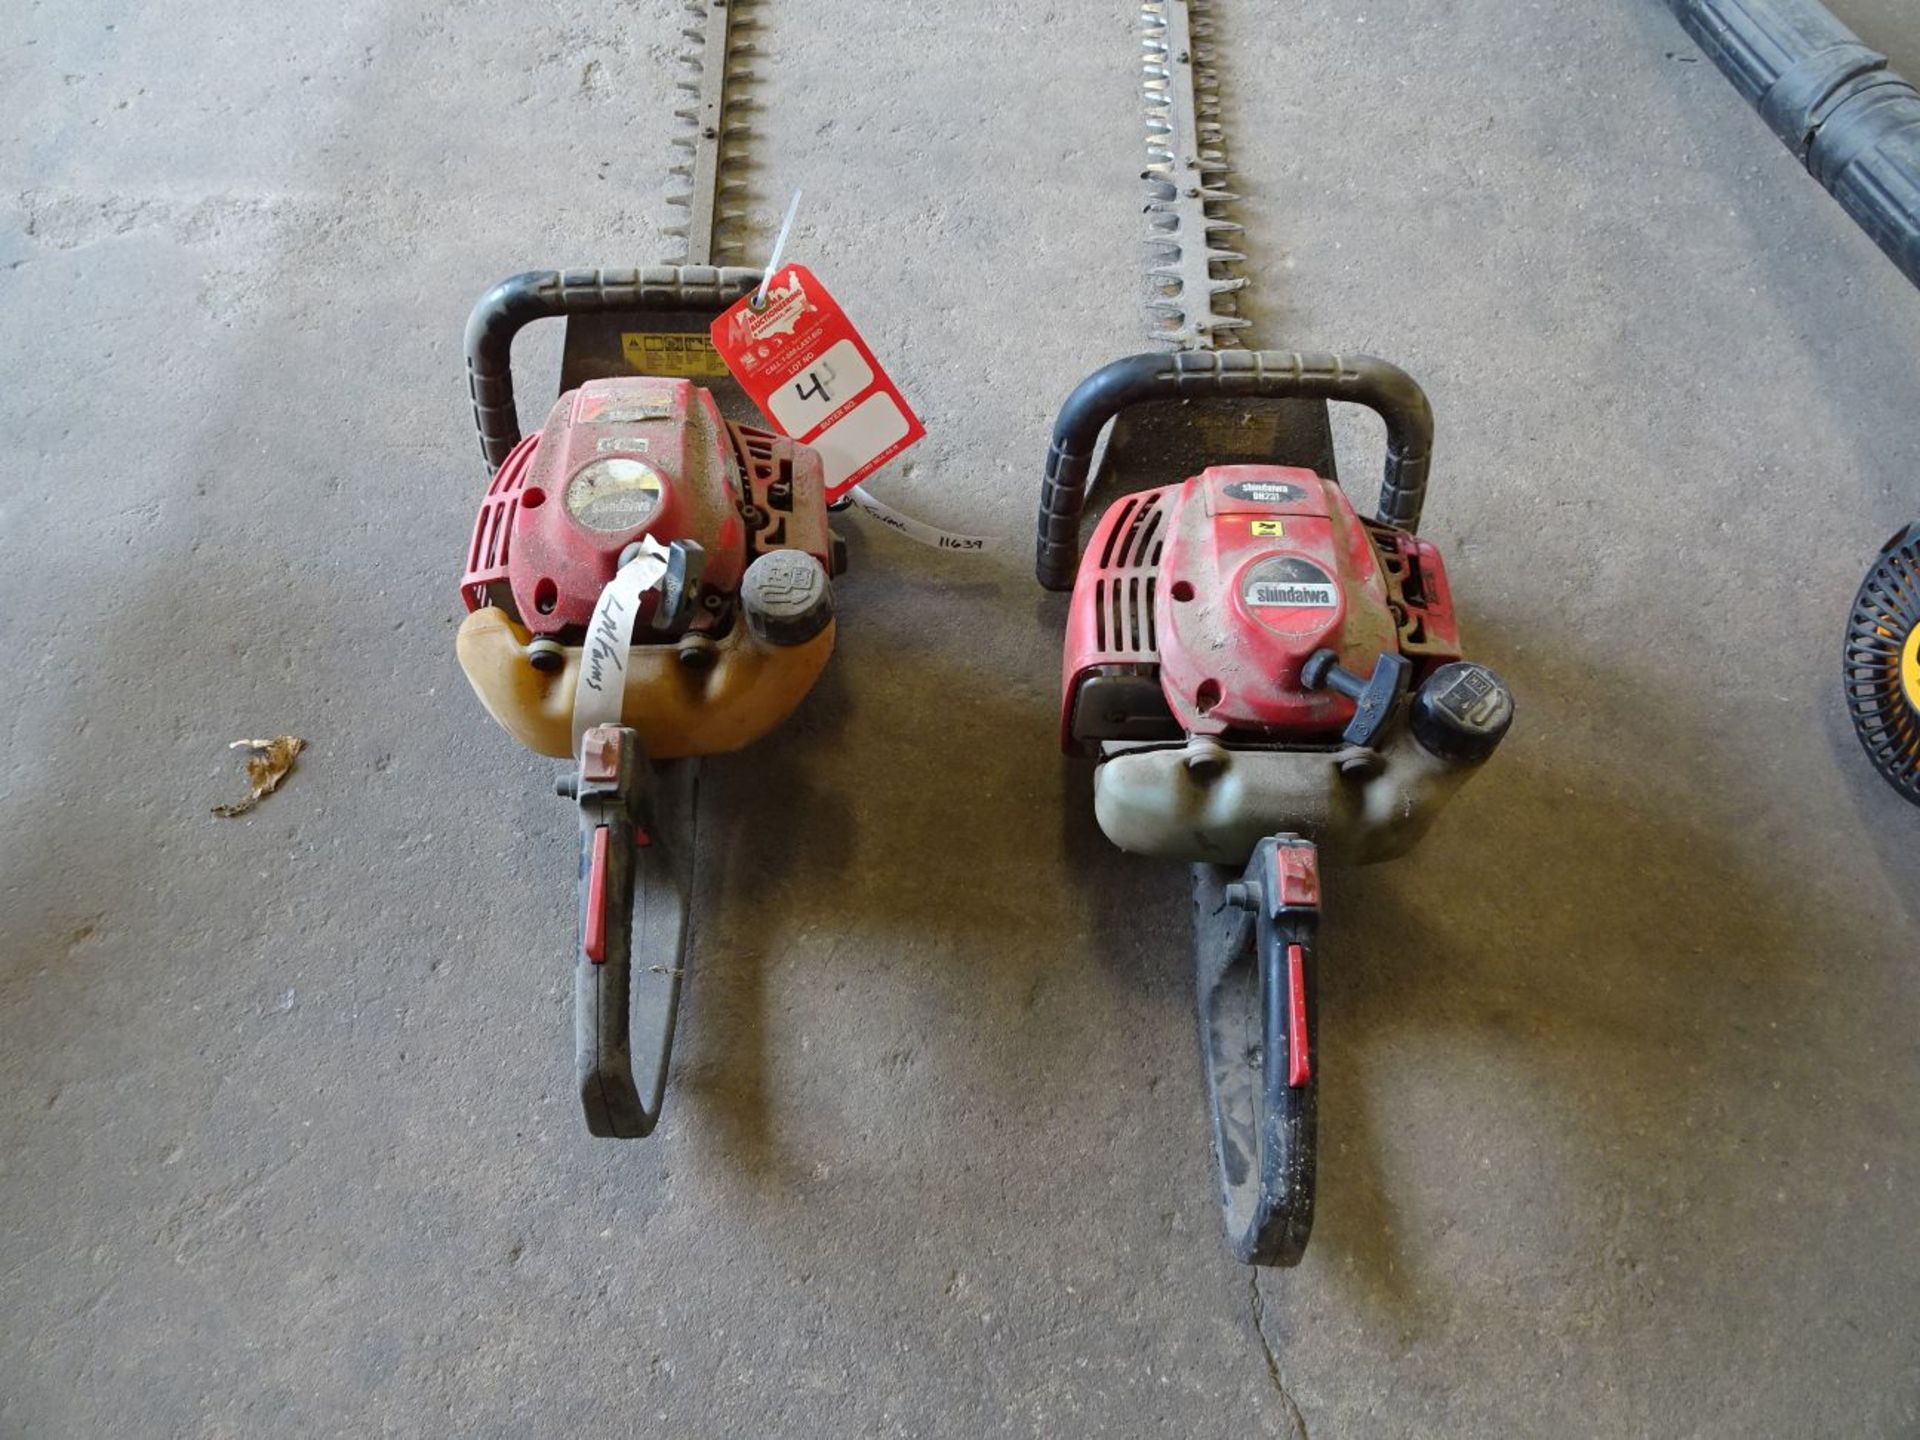 (2) SHINDAIWA HEDGE TRIMMERS, DH231 AND DH230 MODELS (LOCATION: SHOP)